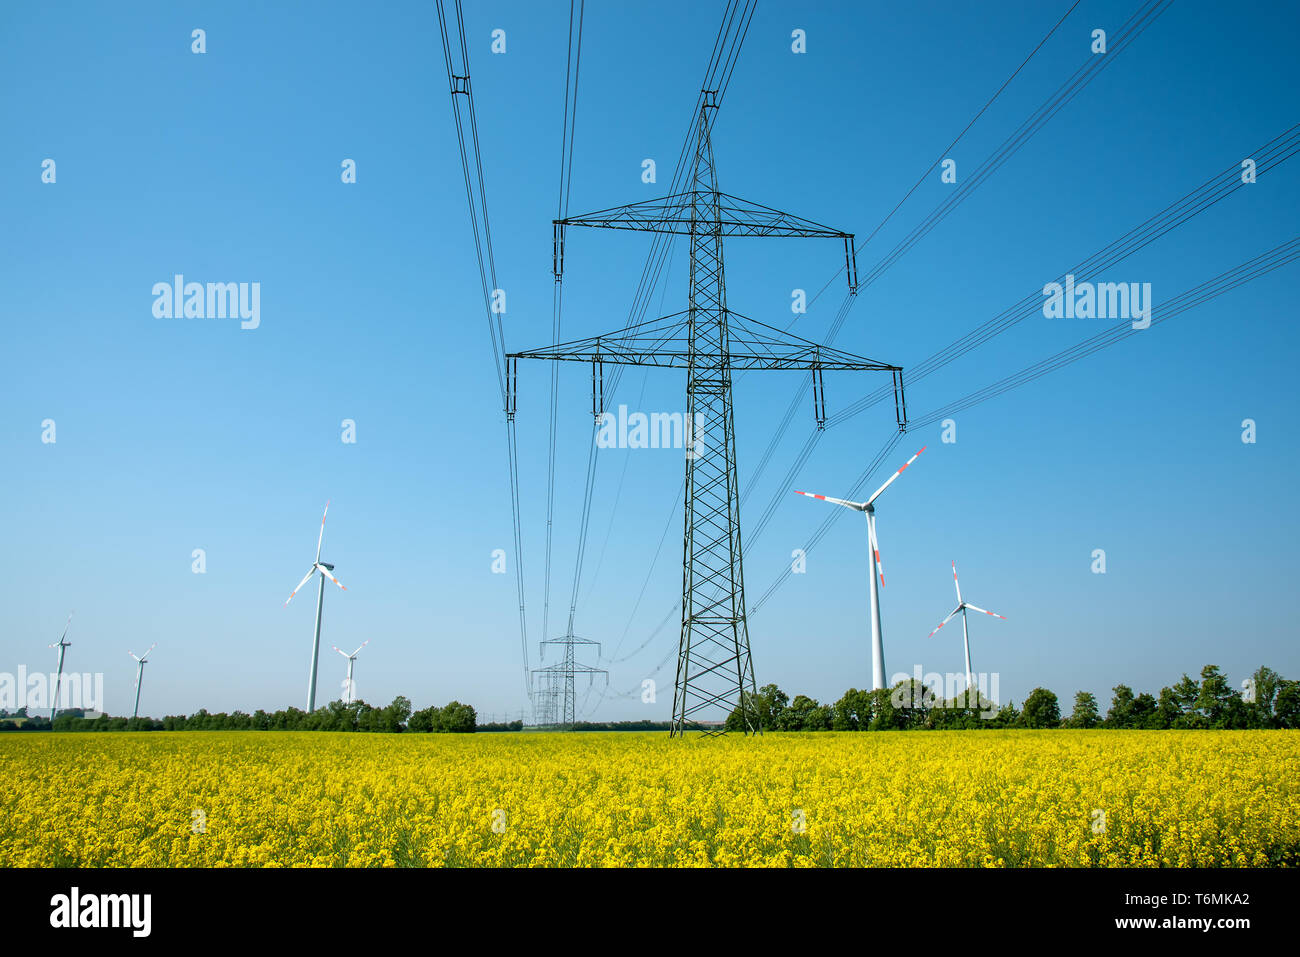 Power transmission lines in a field of blooming oilseed rape seen in rural Germany Stock Photo